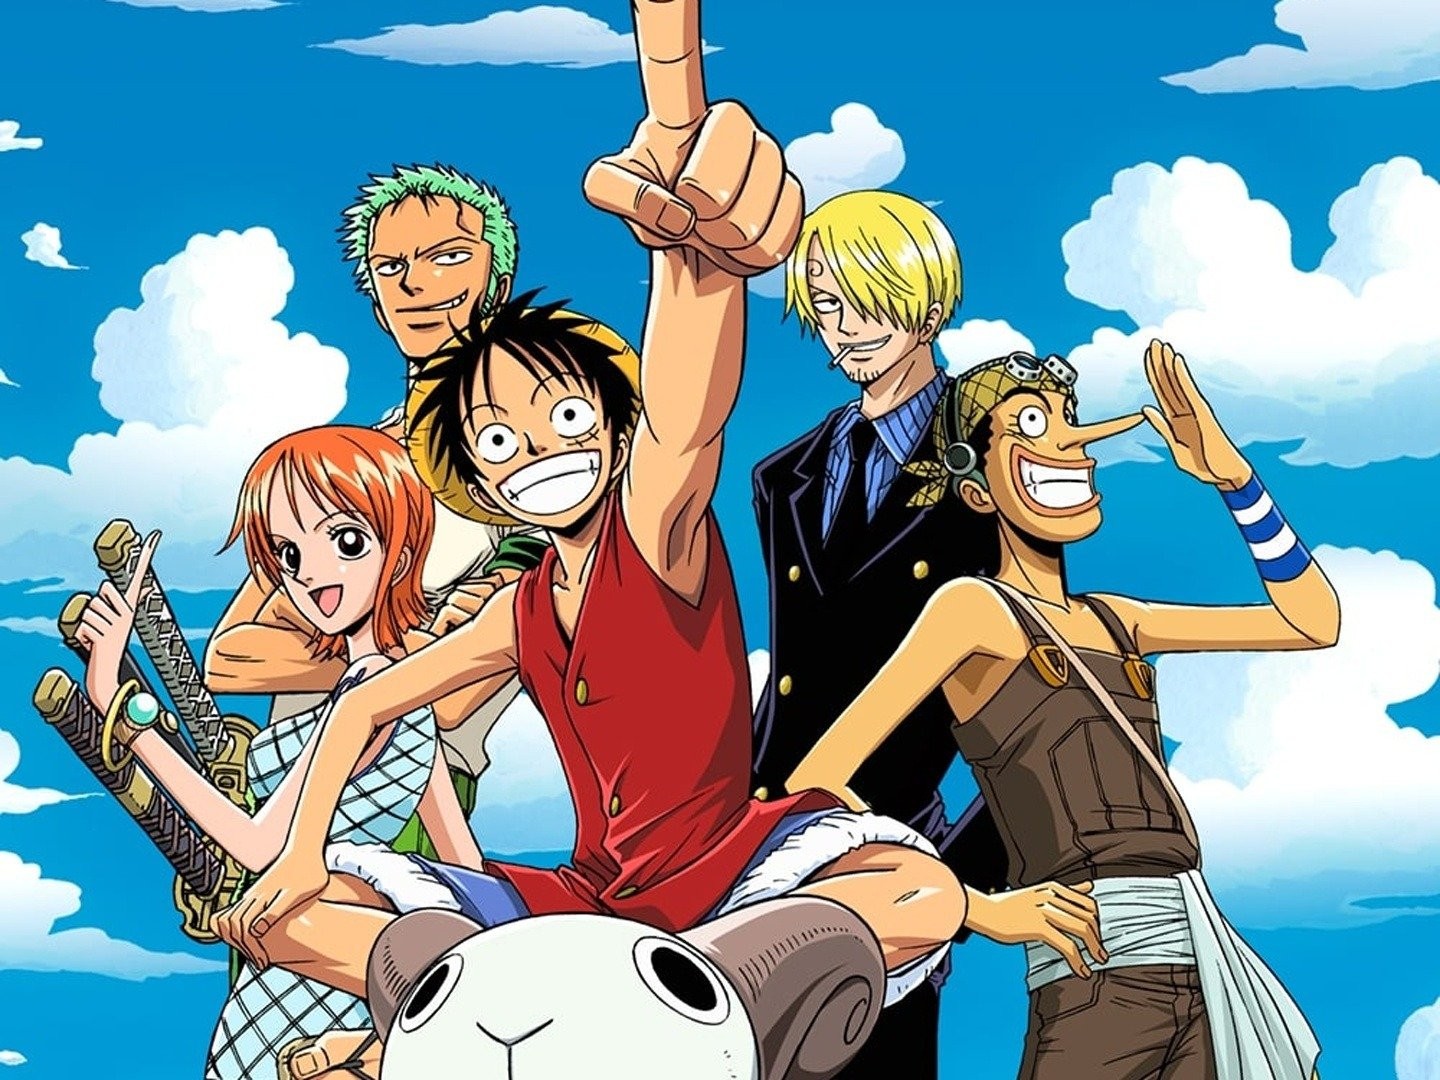 One Piece Straw Hat Pirates Oda Cover draw in Anime Style ! by me